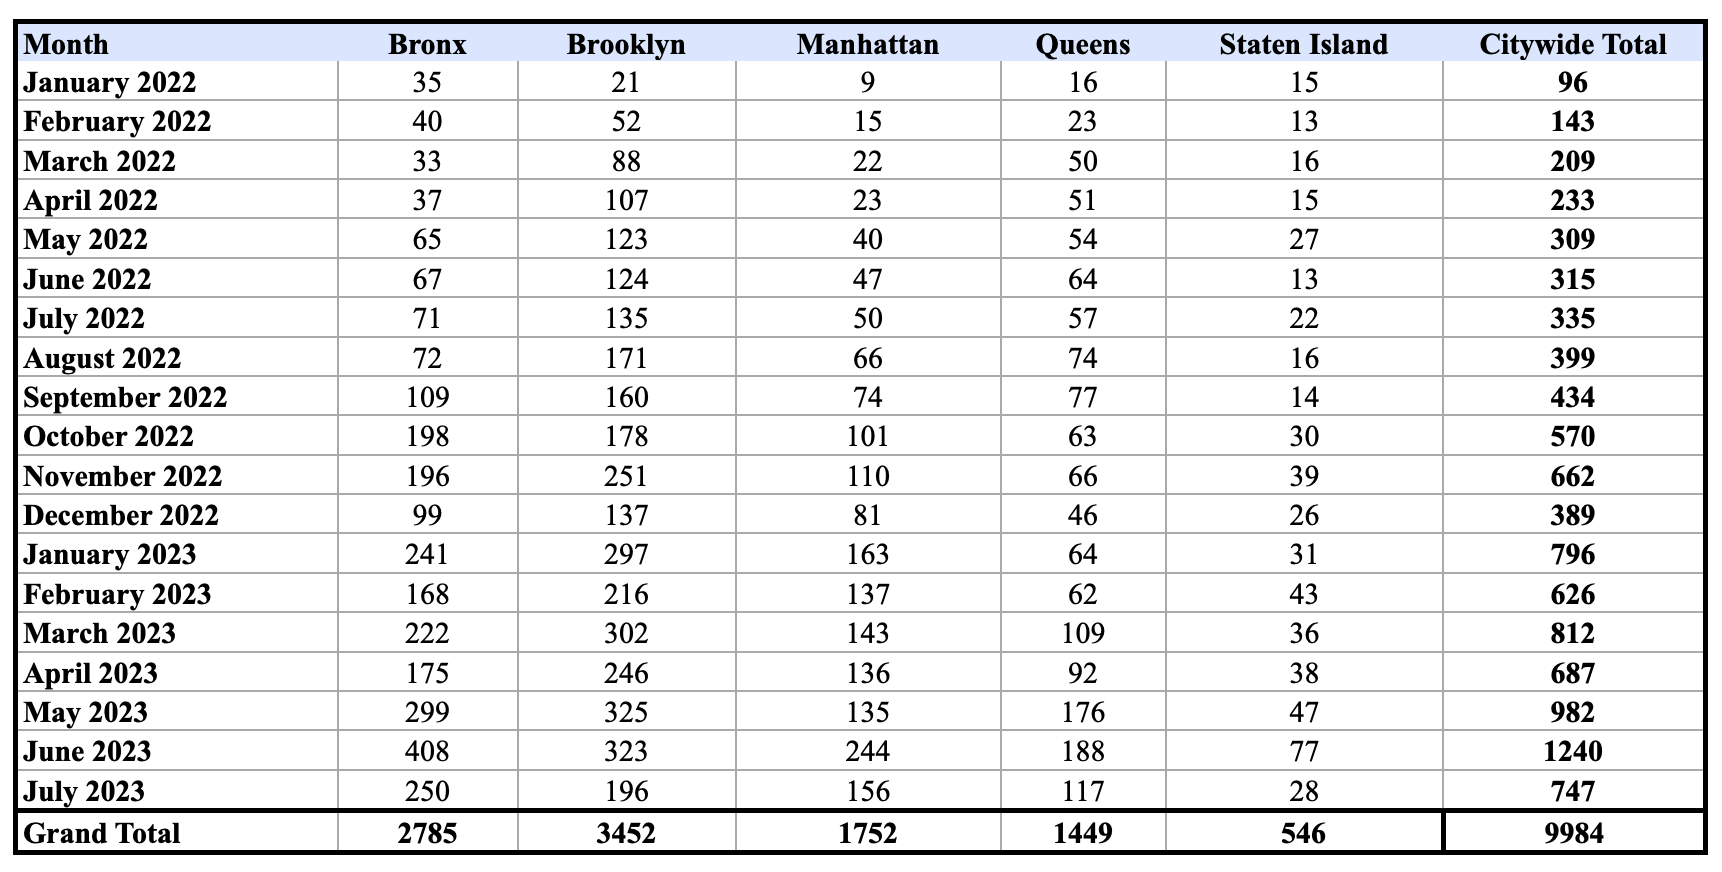 evictions - chart showing a total of 3,452 evictions in brooklyn from january 2022 to july 2023